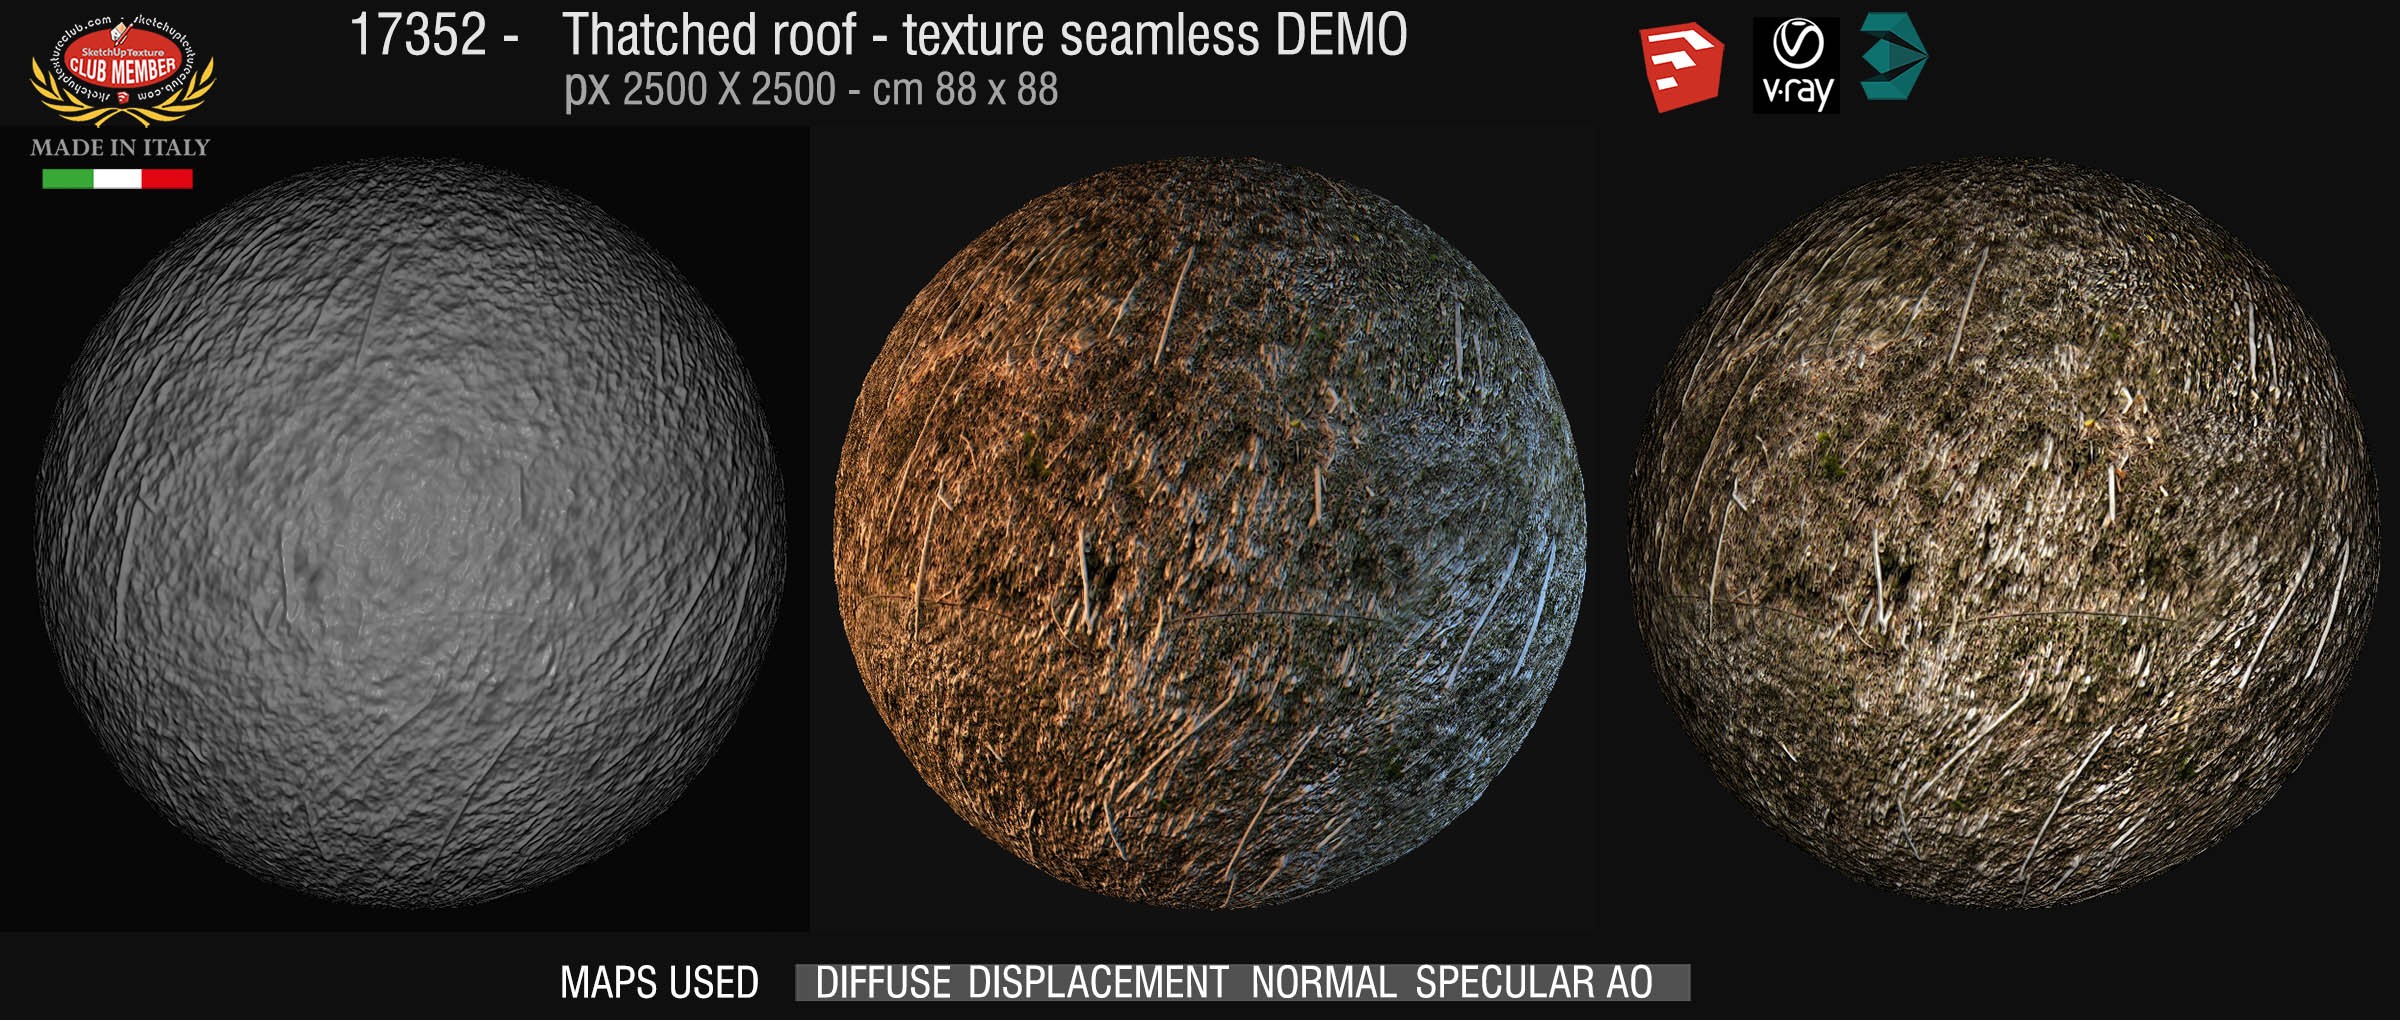 17352 Thatched roof texture seamless + maps DEMO